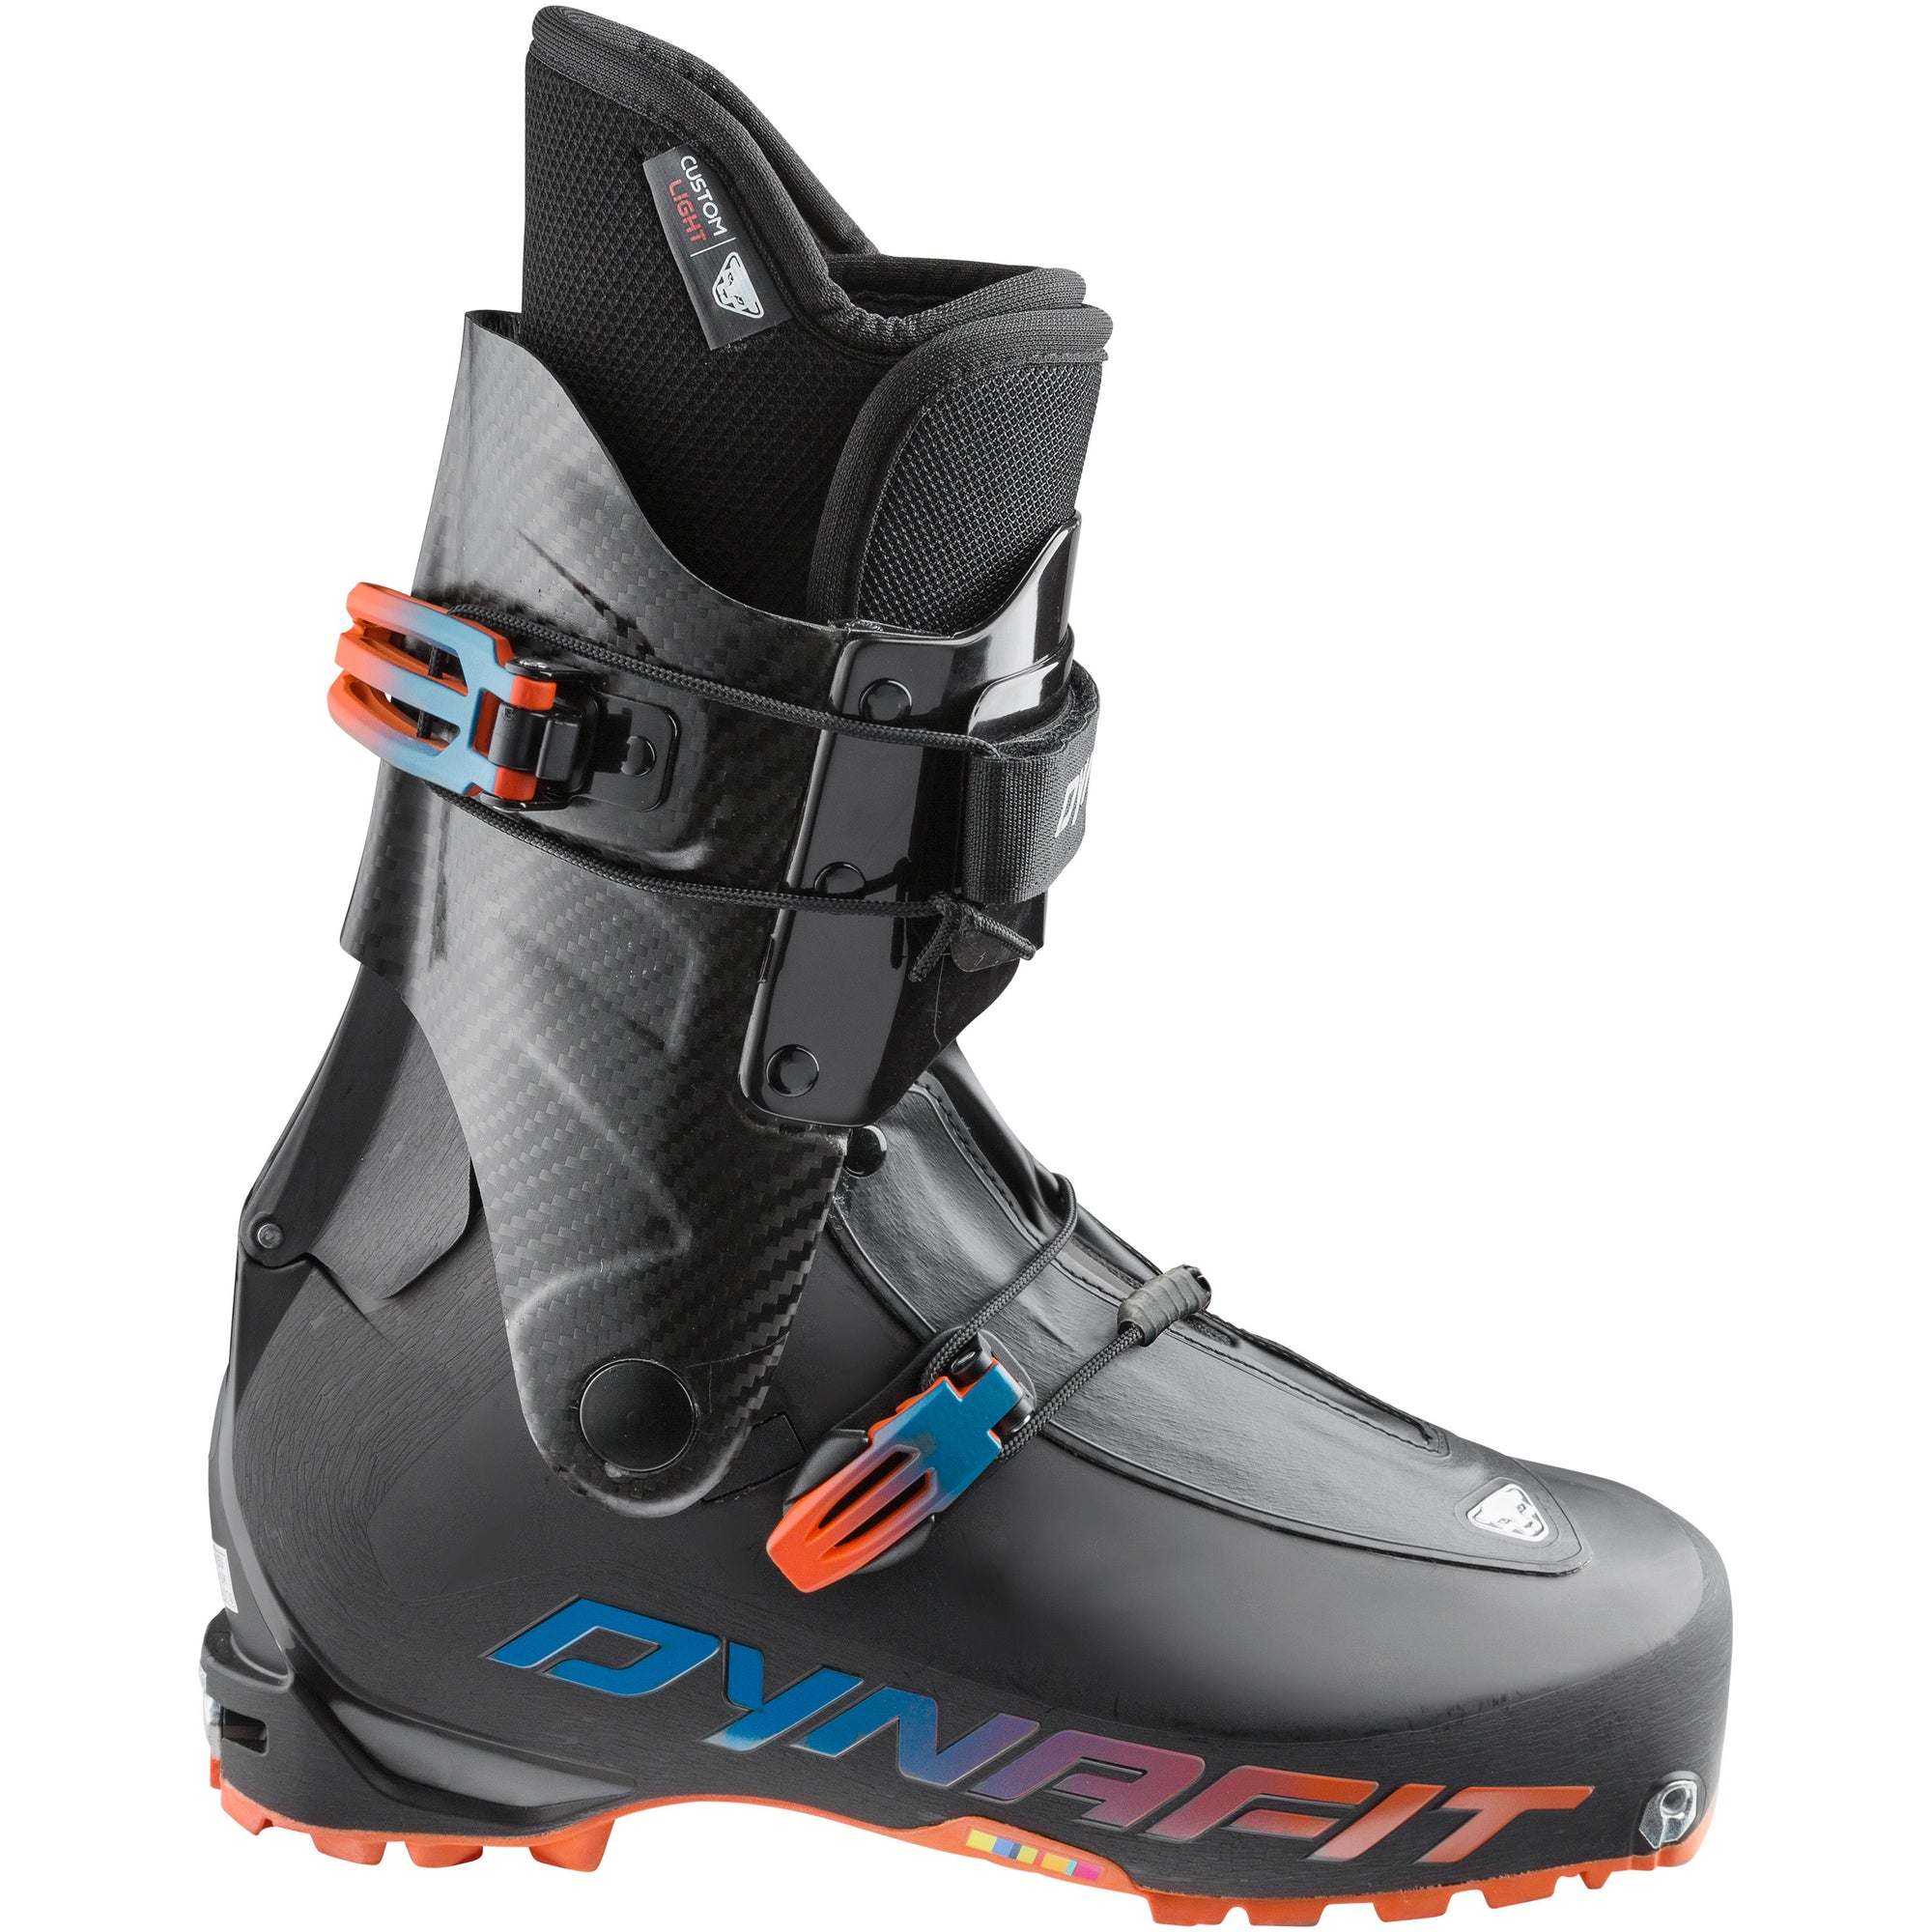 2 buckle carbon ski touring boot dynafit